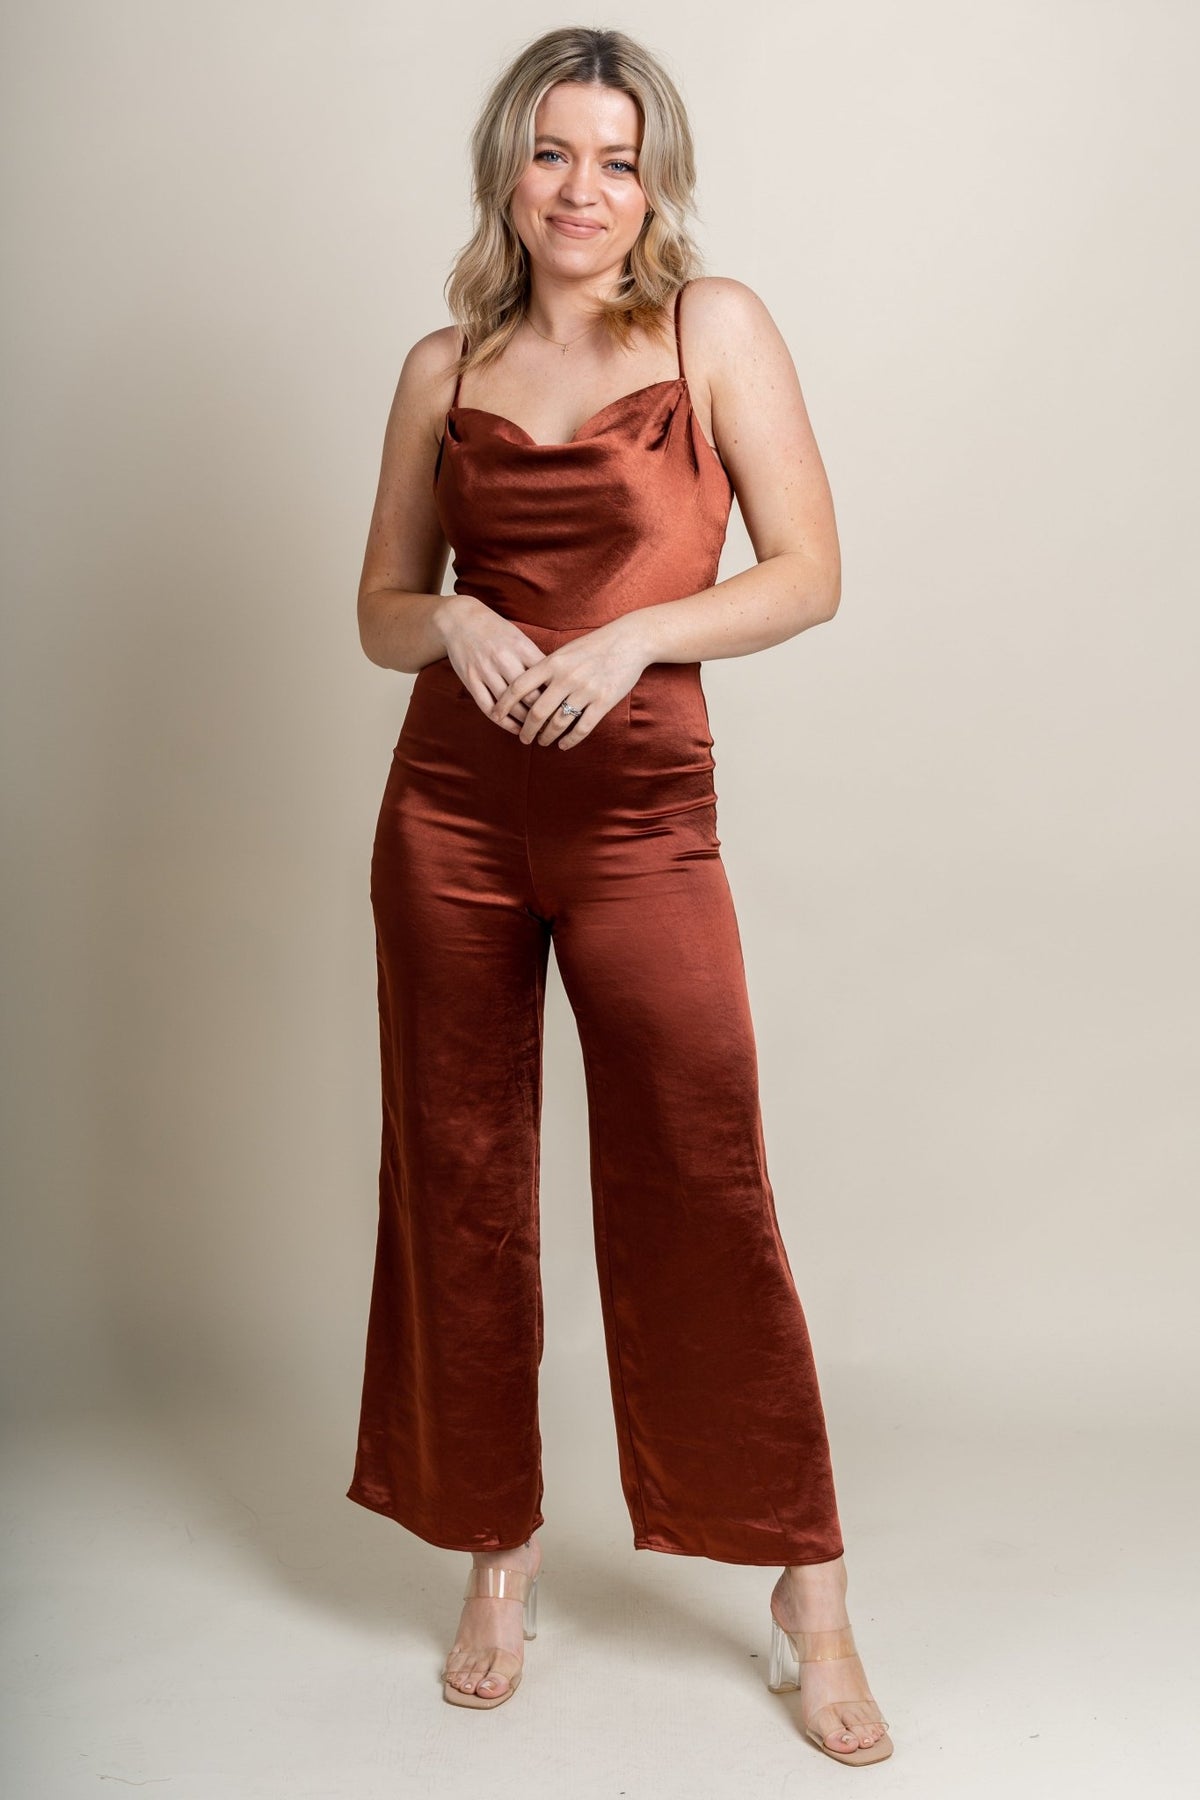 Cowl neck satin jumpsuit cognac - Cute Jumpsuit - Trendy Rompers and Pantsuits at Lush Fashion Lounge Boutique in Oklahoma City